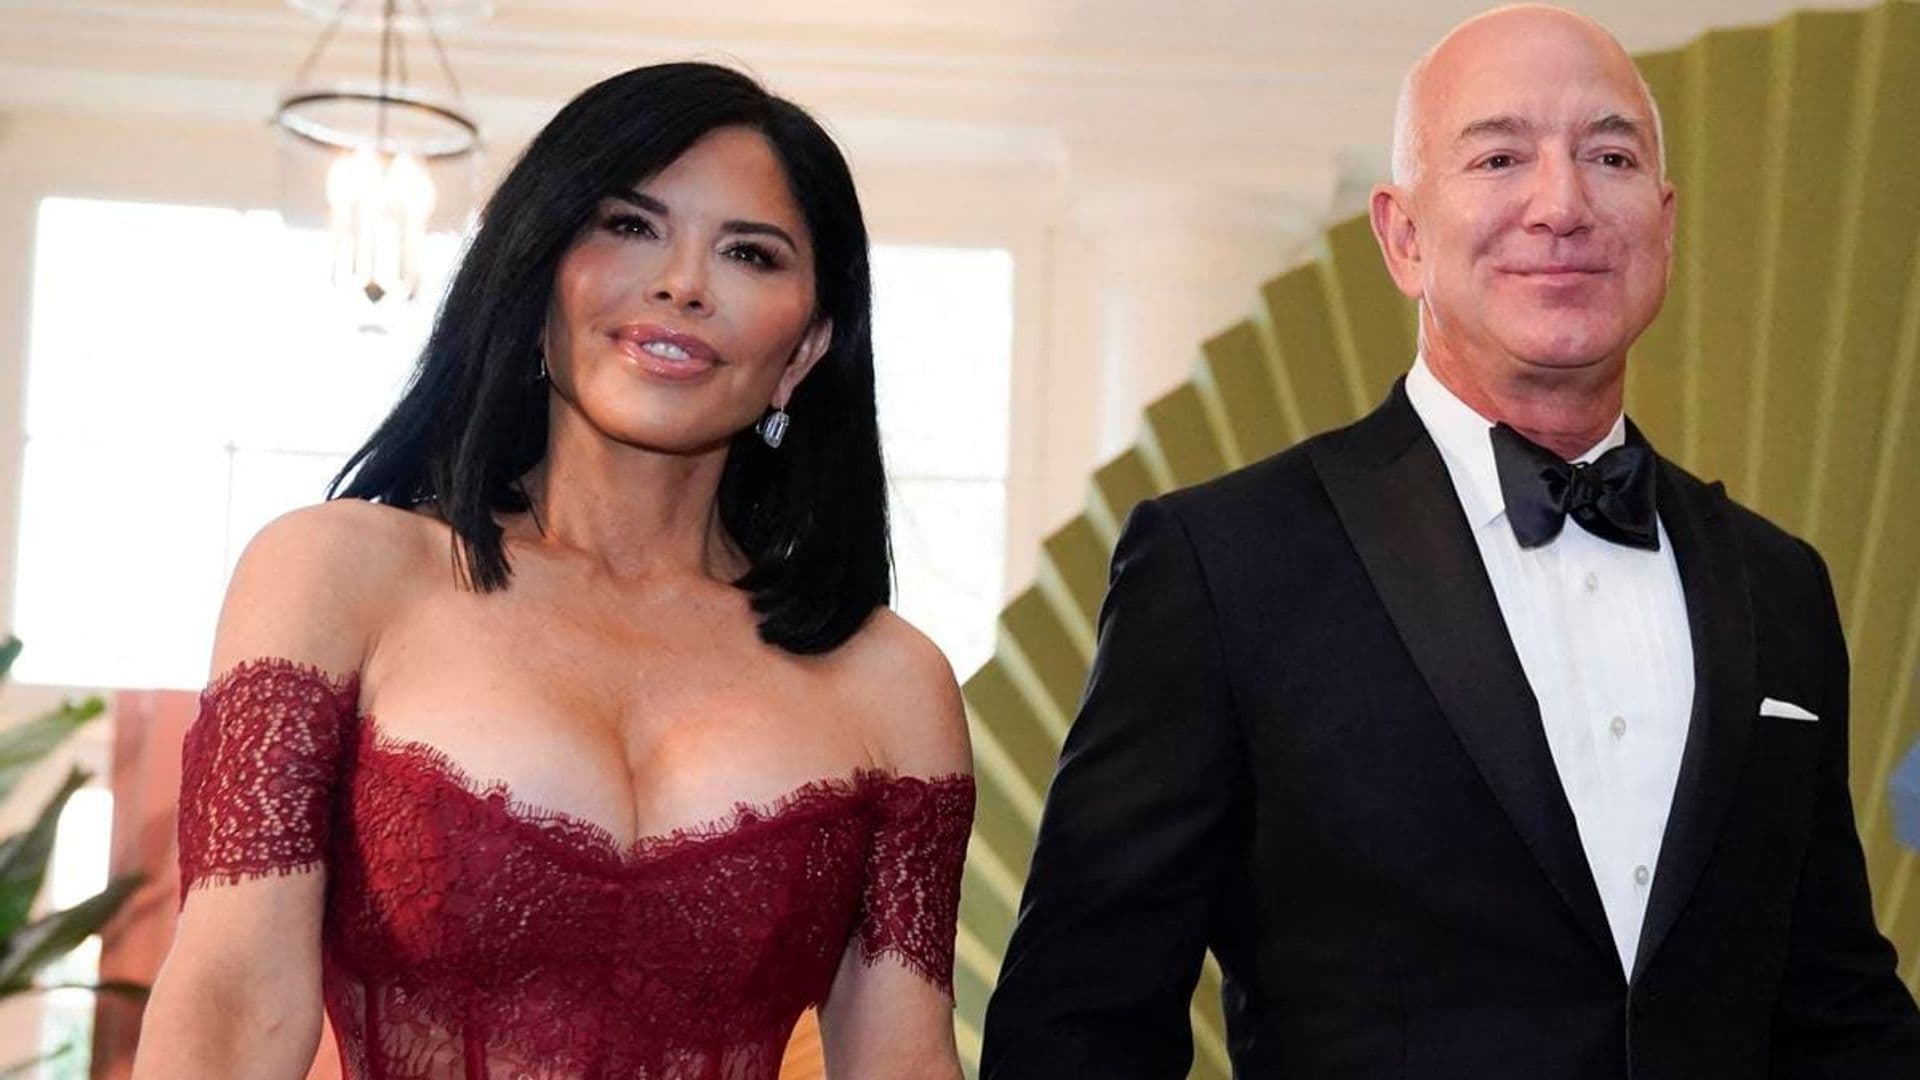 Lauren Sanchez wears a red corset dress for White House dinner with Jeff Bezos